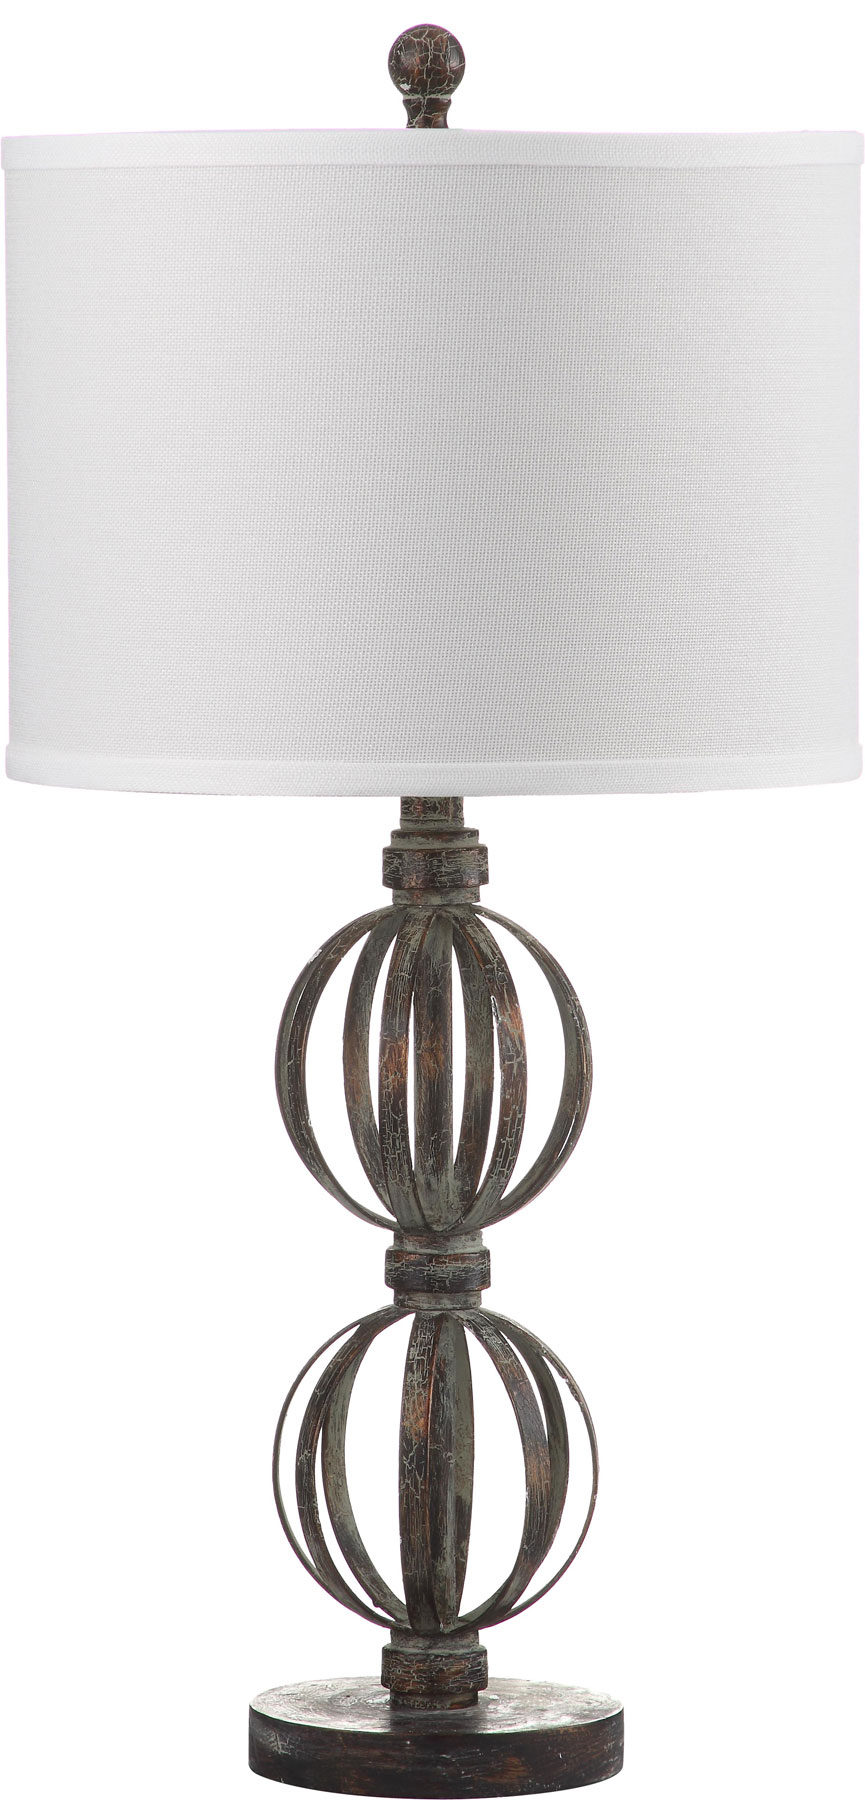 Lit4313a Set2 Table Lamps Lighting Safavieh intended for dimensions 865 X 1800